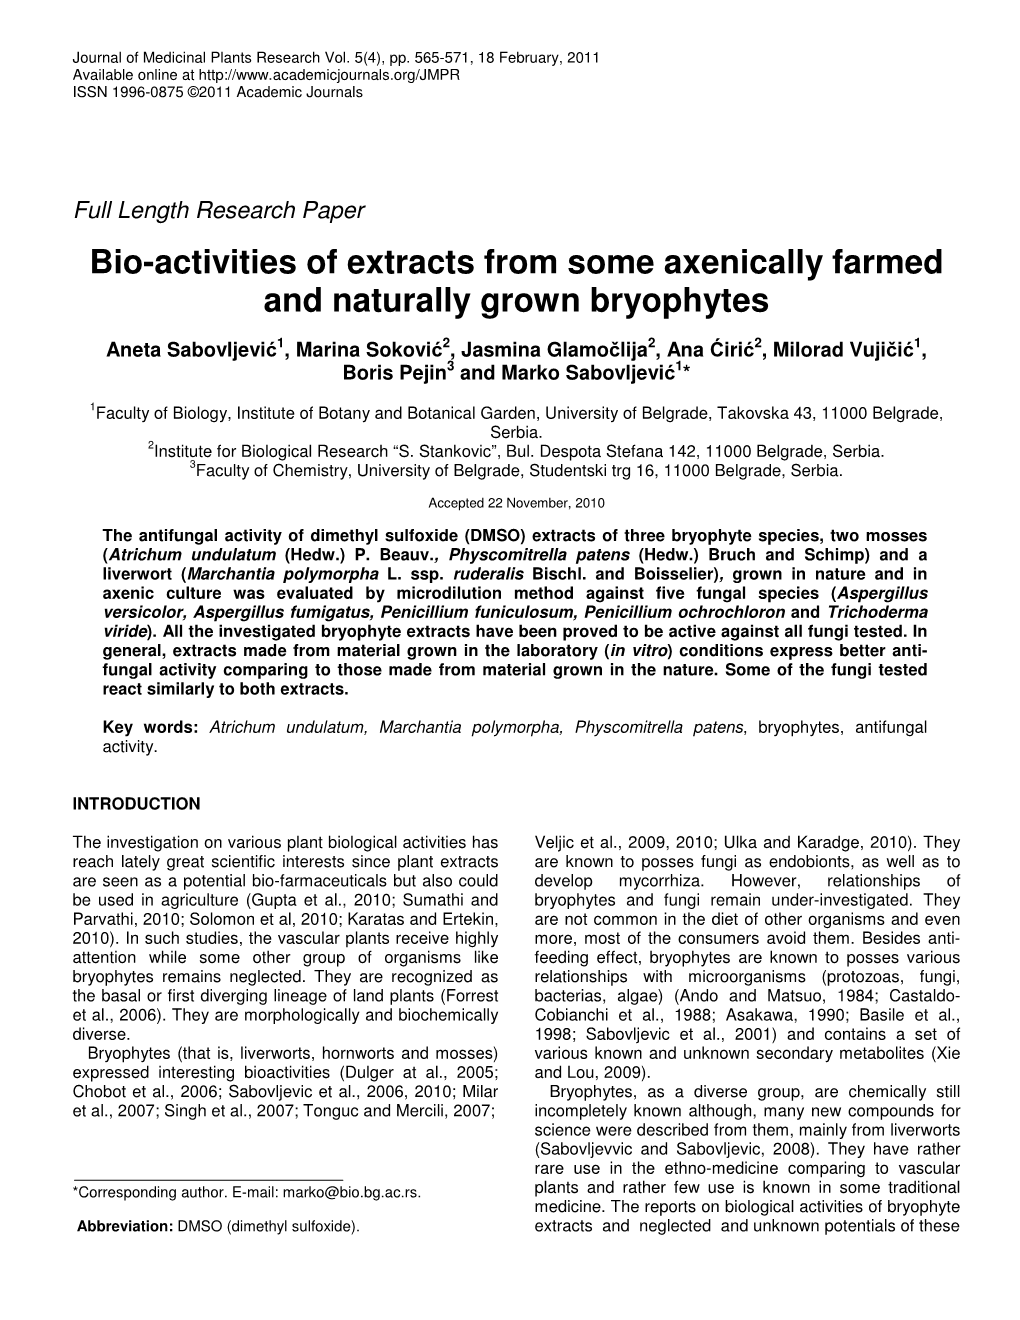 Bio-Activities of Extracts from Some Axenically Farmed and Naturally Grown Bryophytes